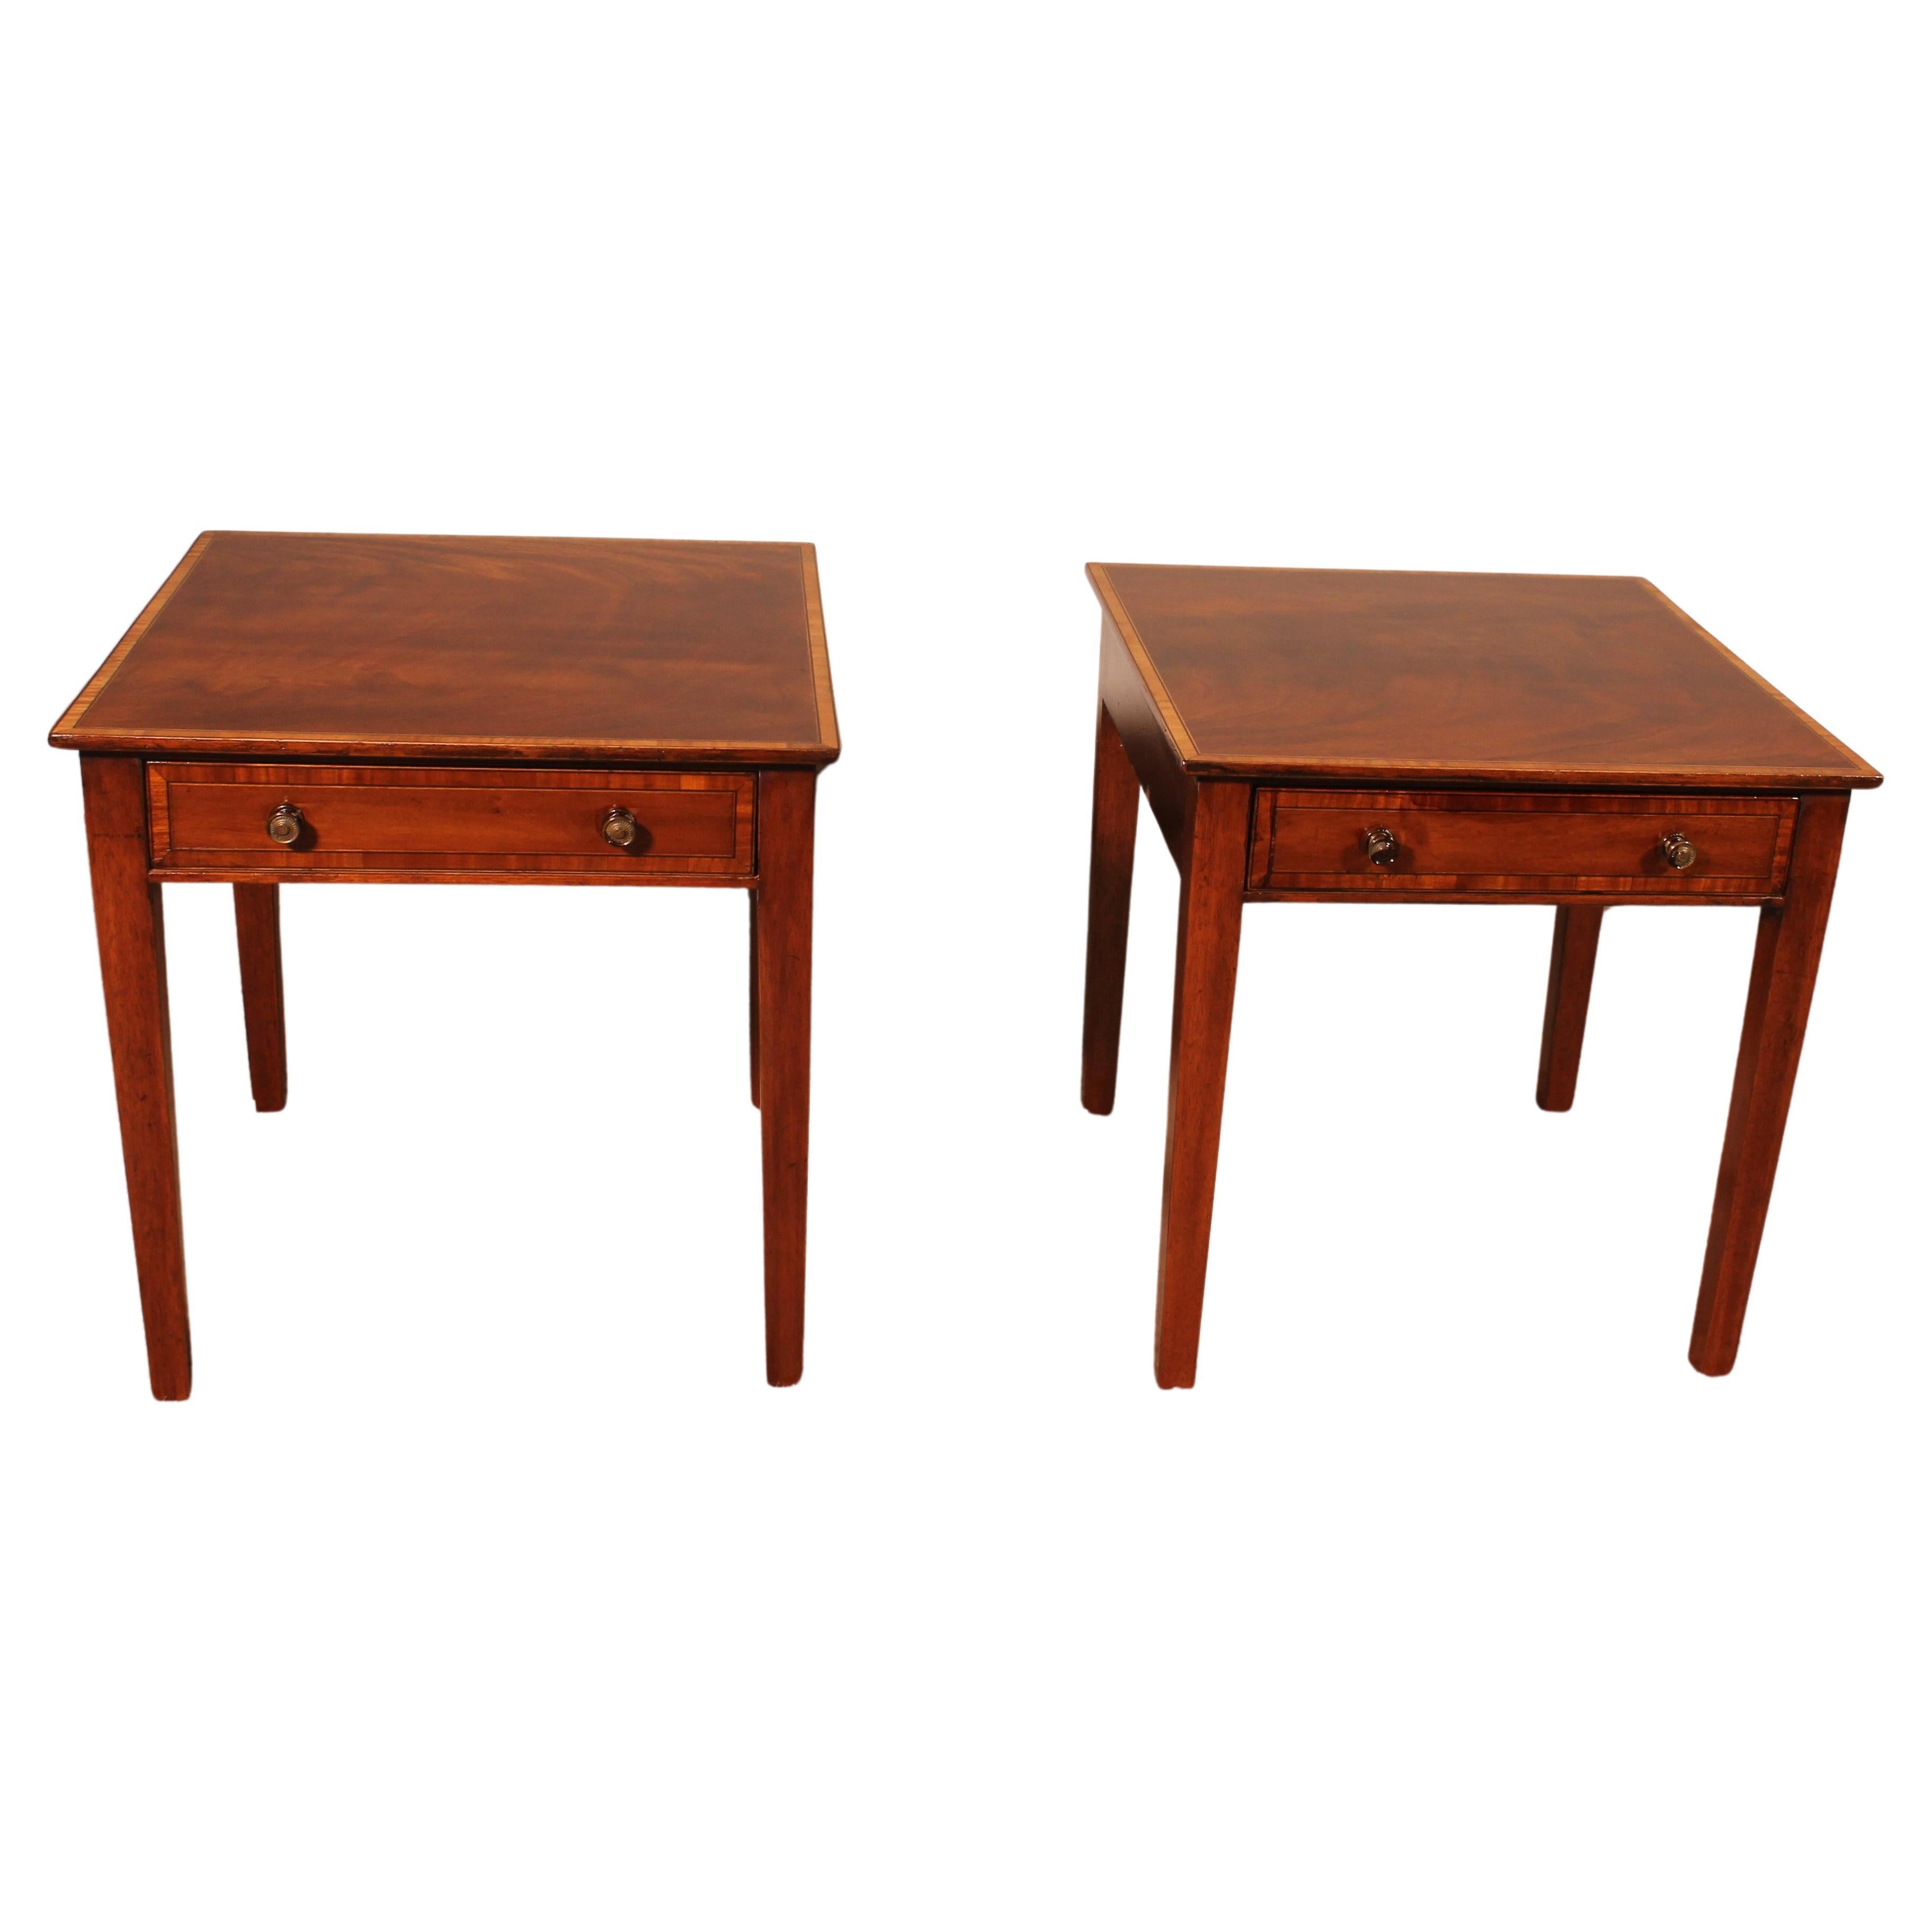 Pair Of Mahogany Bedside Tables From The Early 19th Century For Sale